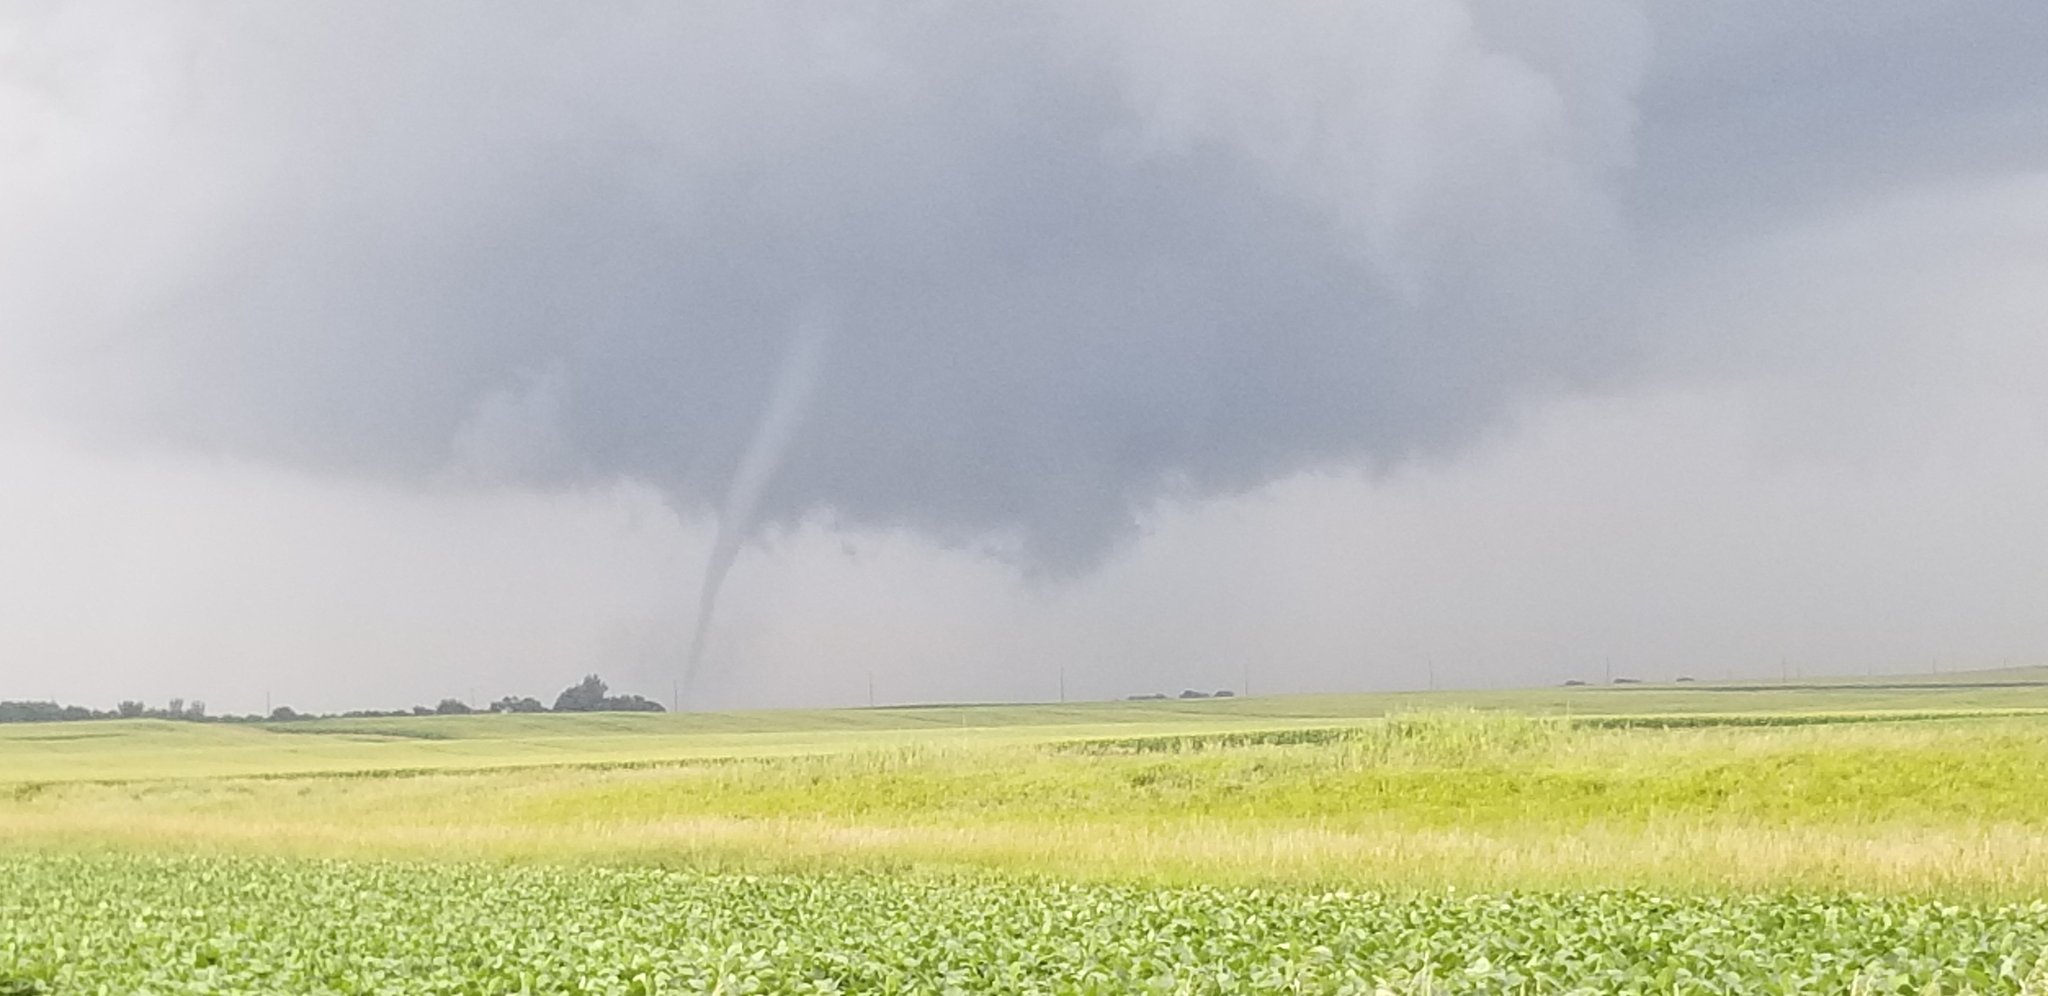 Tornado between Stanhope to Jewell. Photo courtesy of @BTravs.